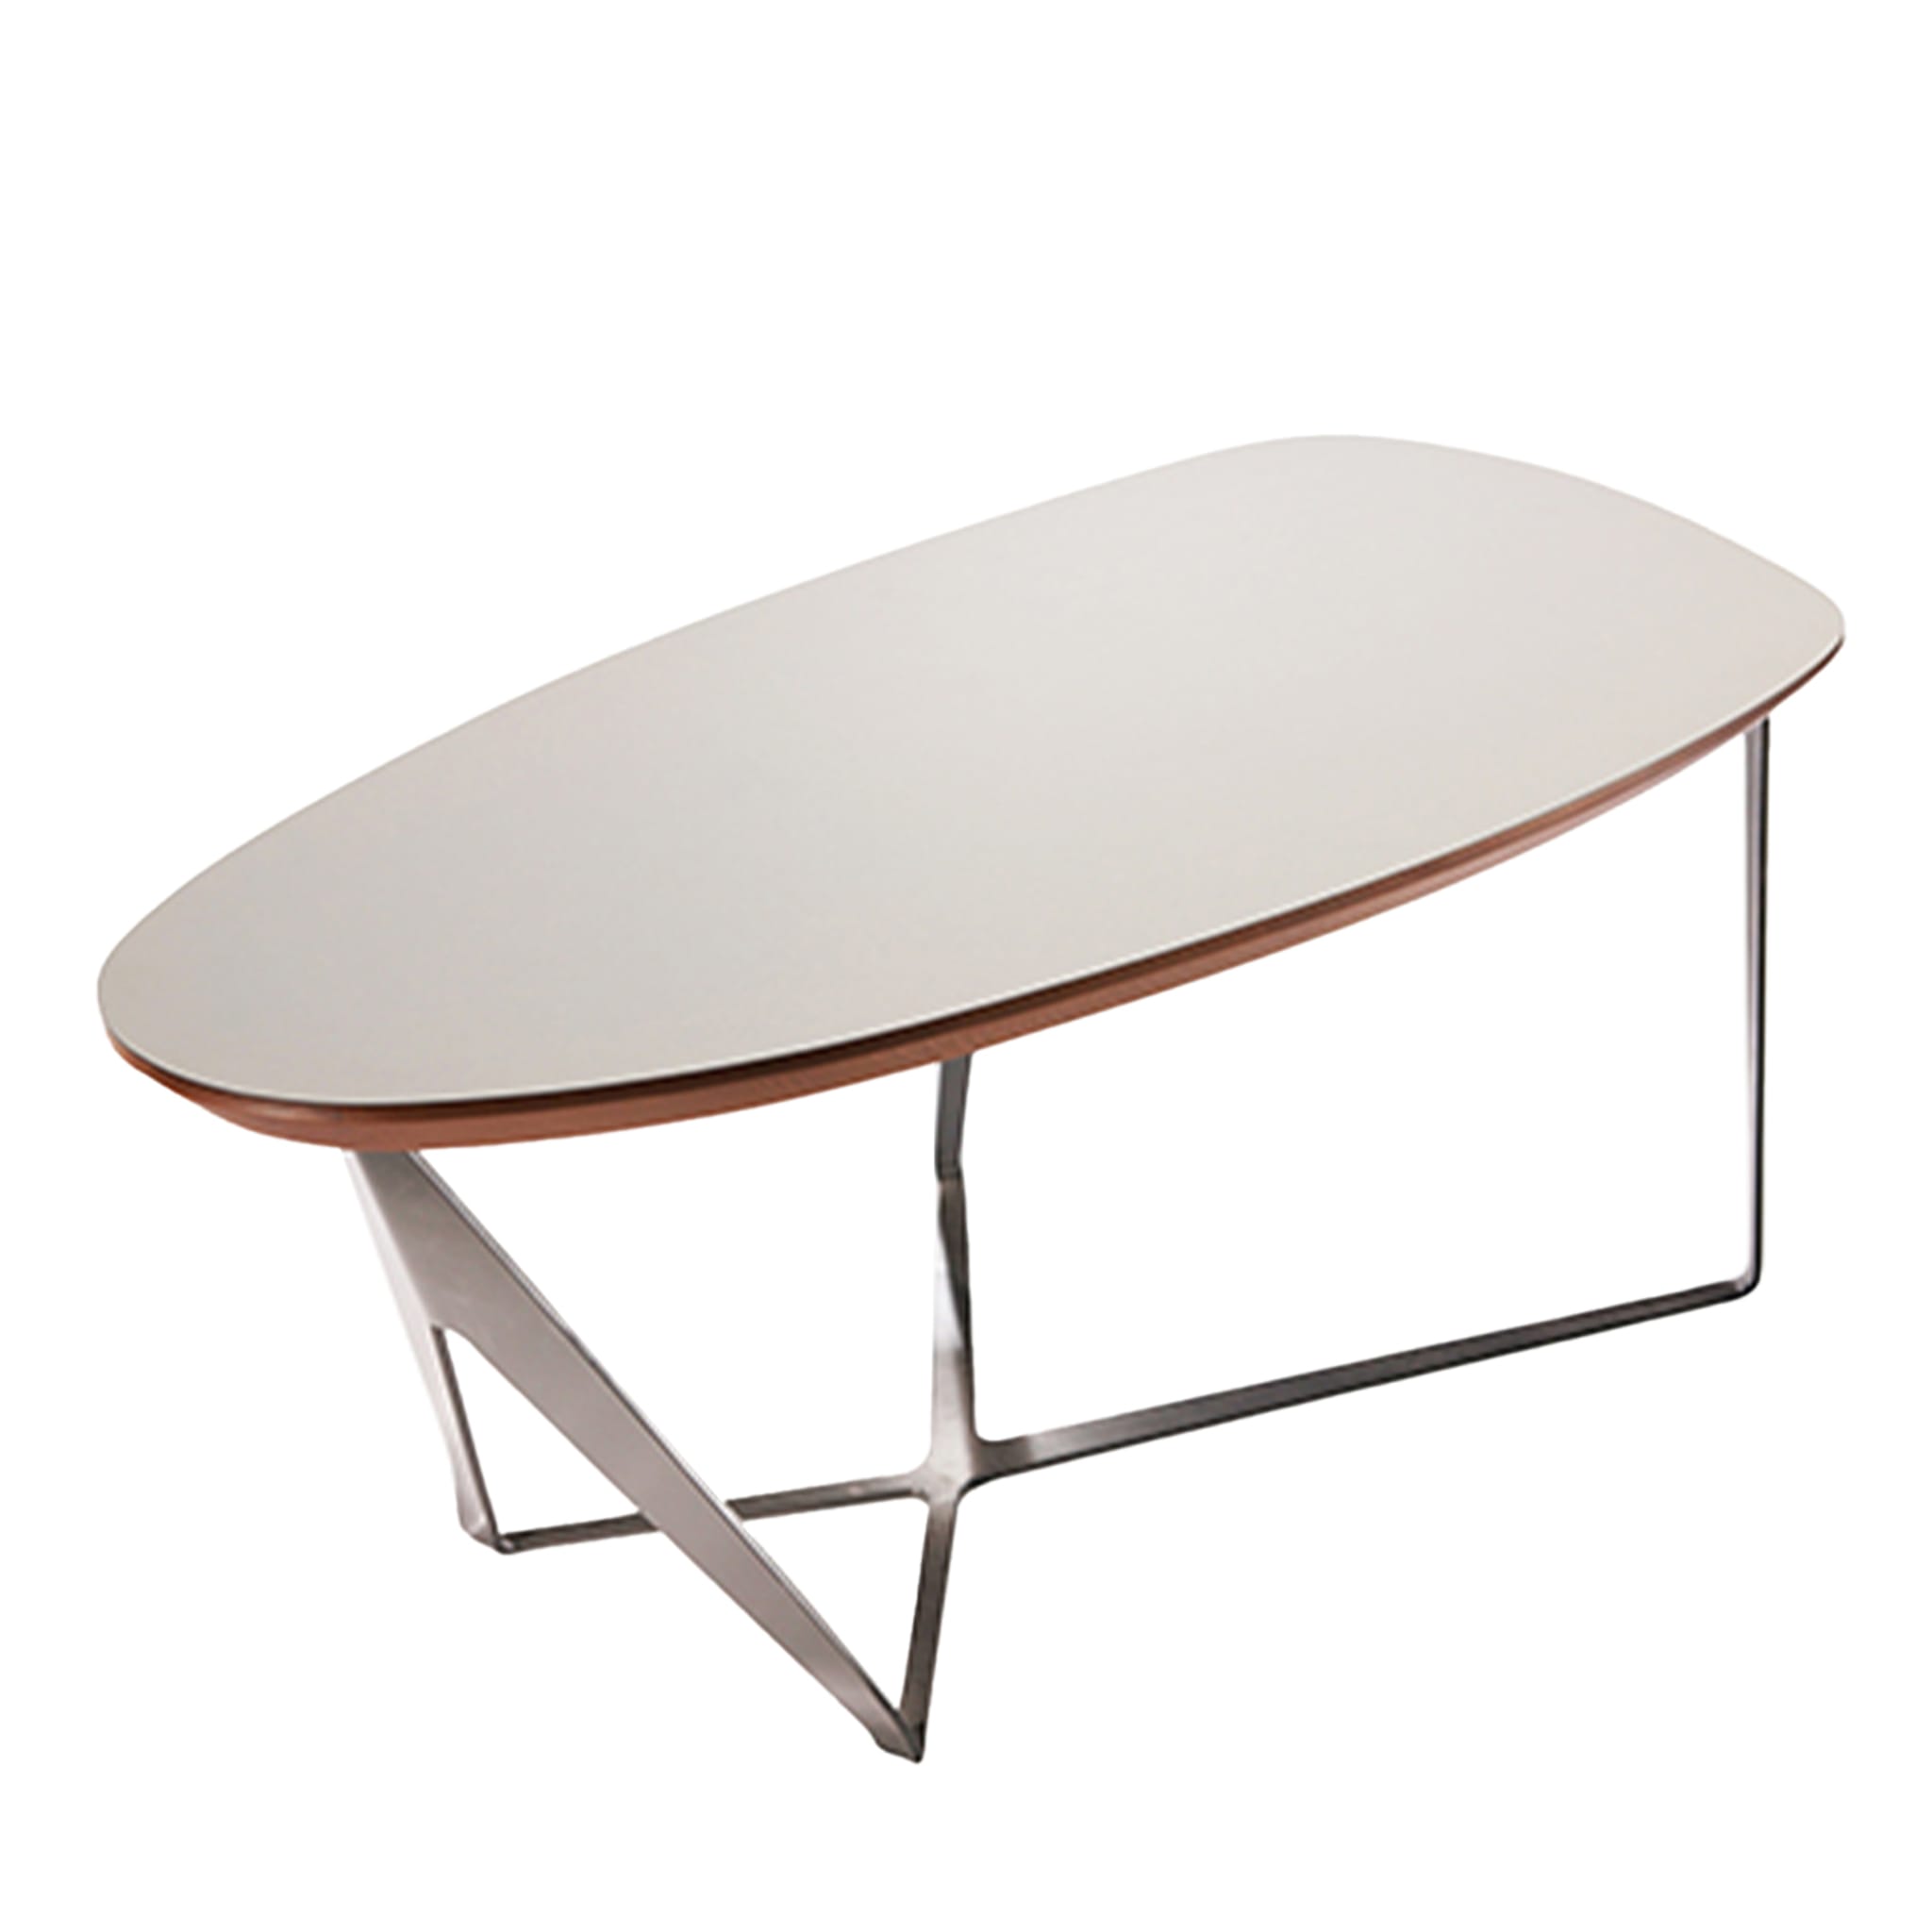 Table basse blanche Ted One Tee - Vue principale